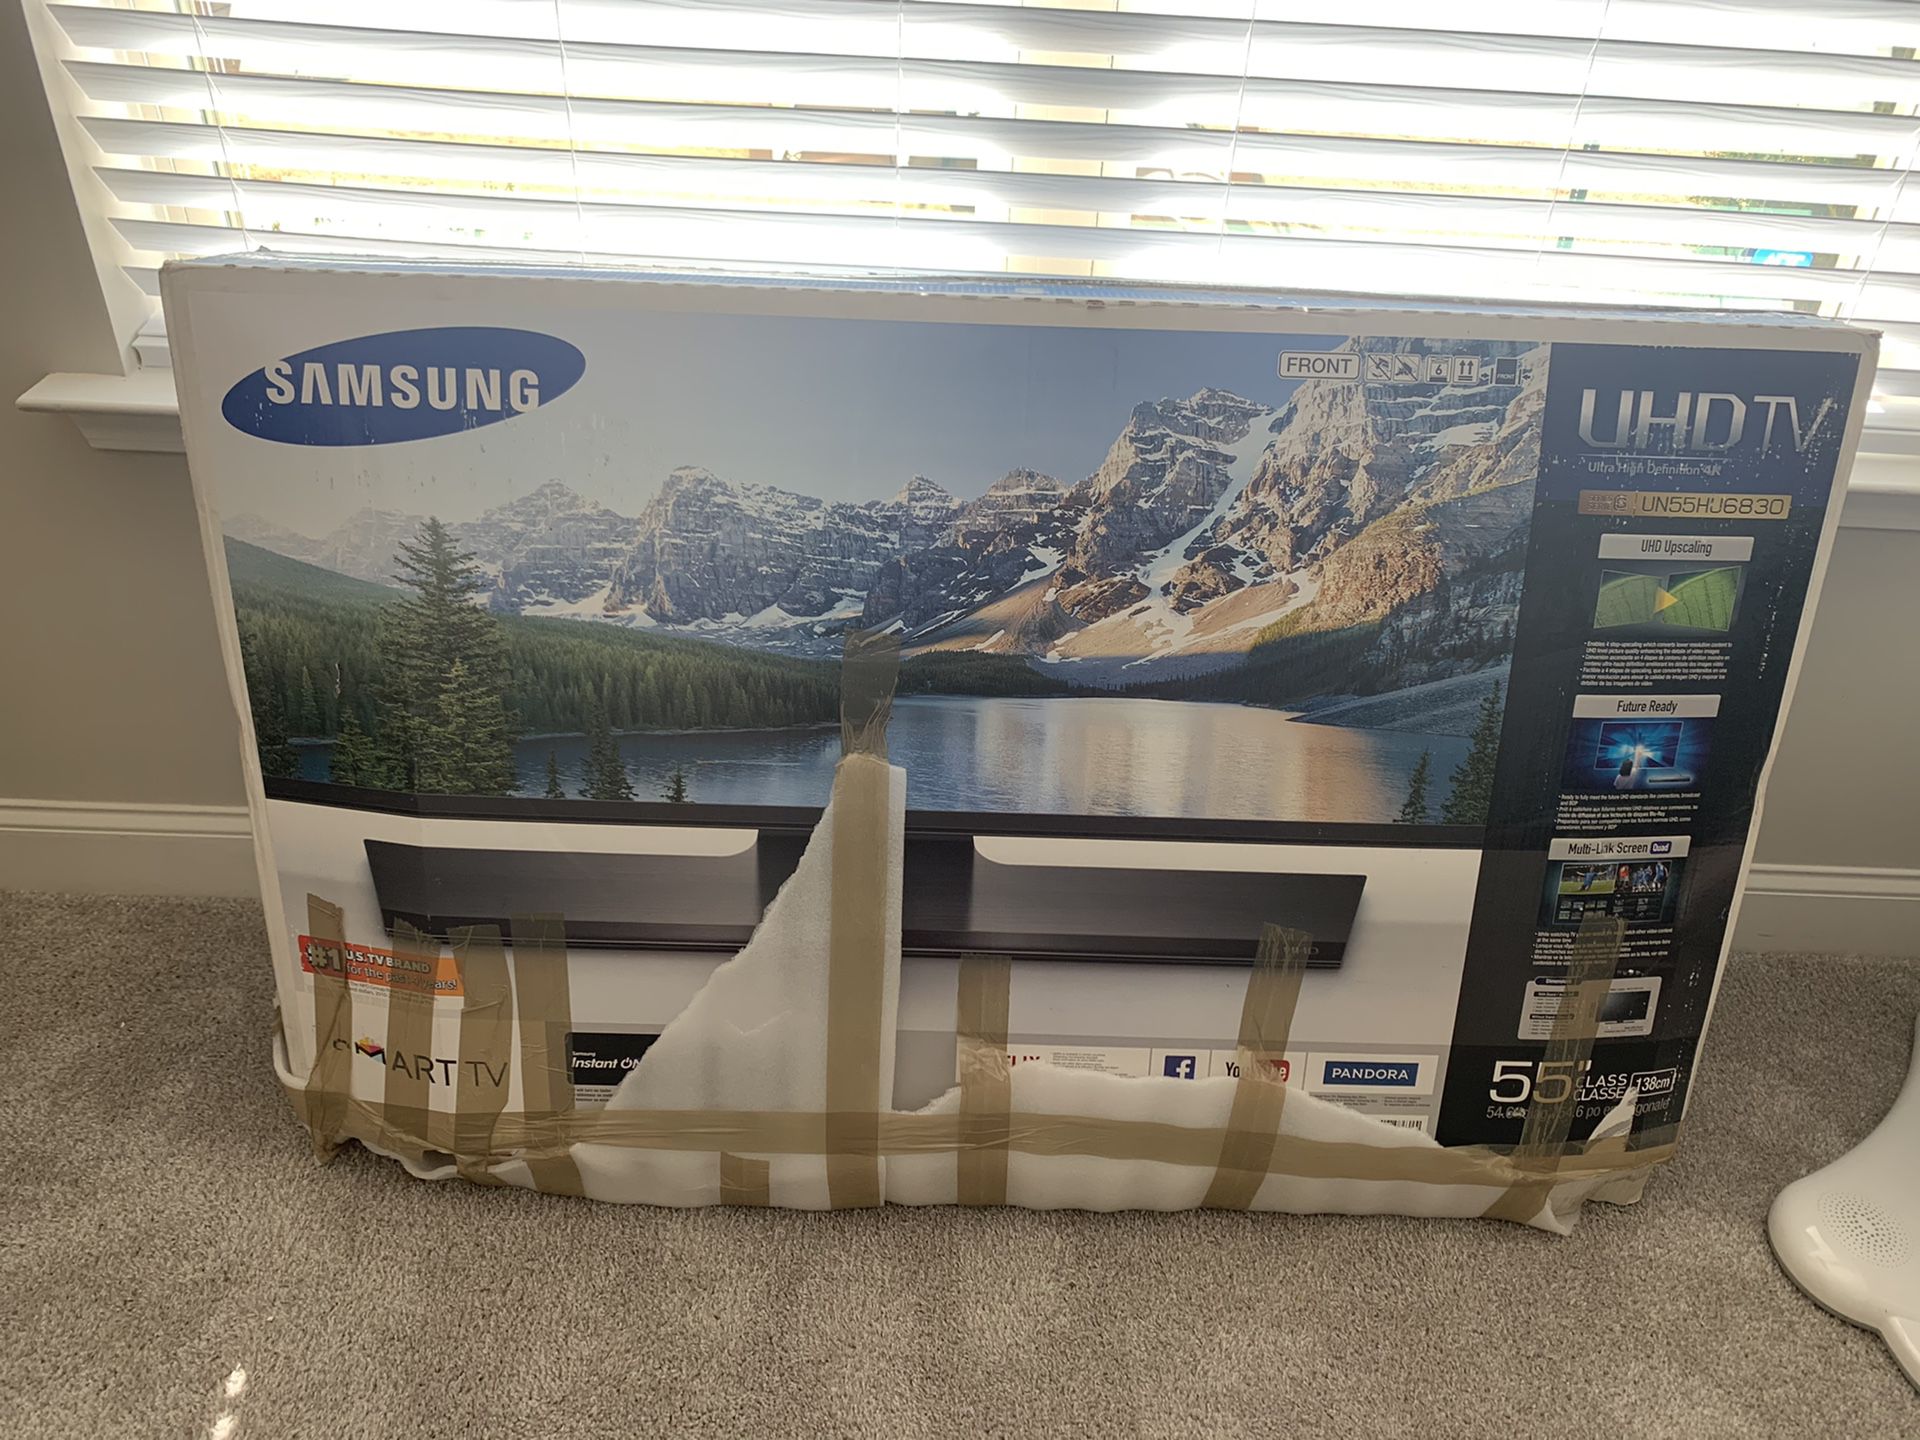 55 inch Toshiba TV - wrapped in box $50 needs to go ASAP - free area rugs to go with and tv stand